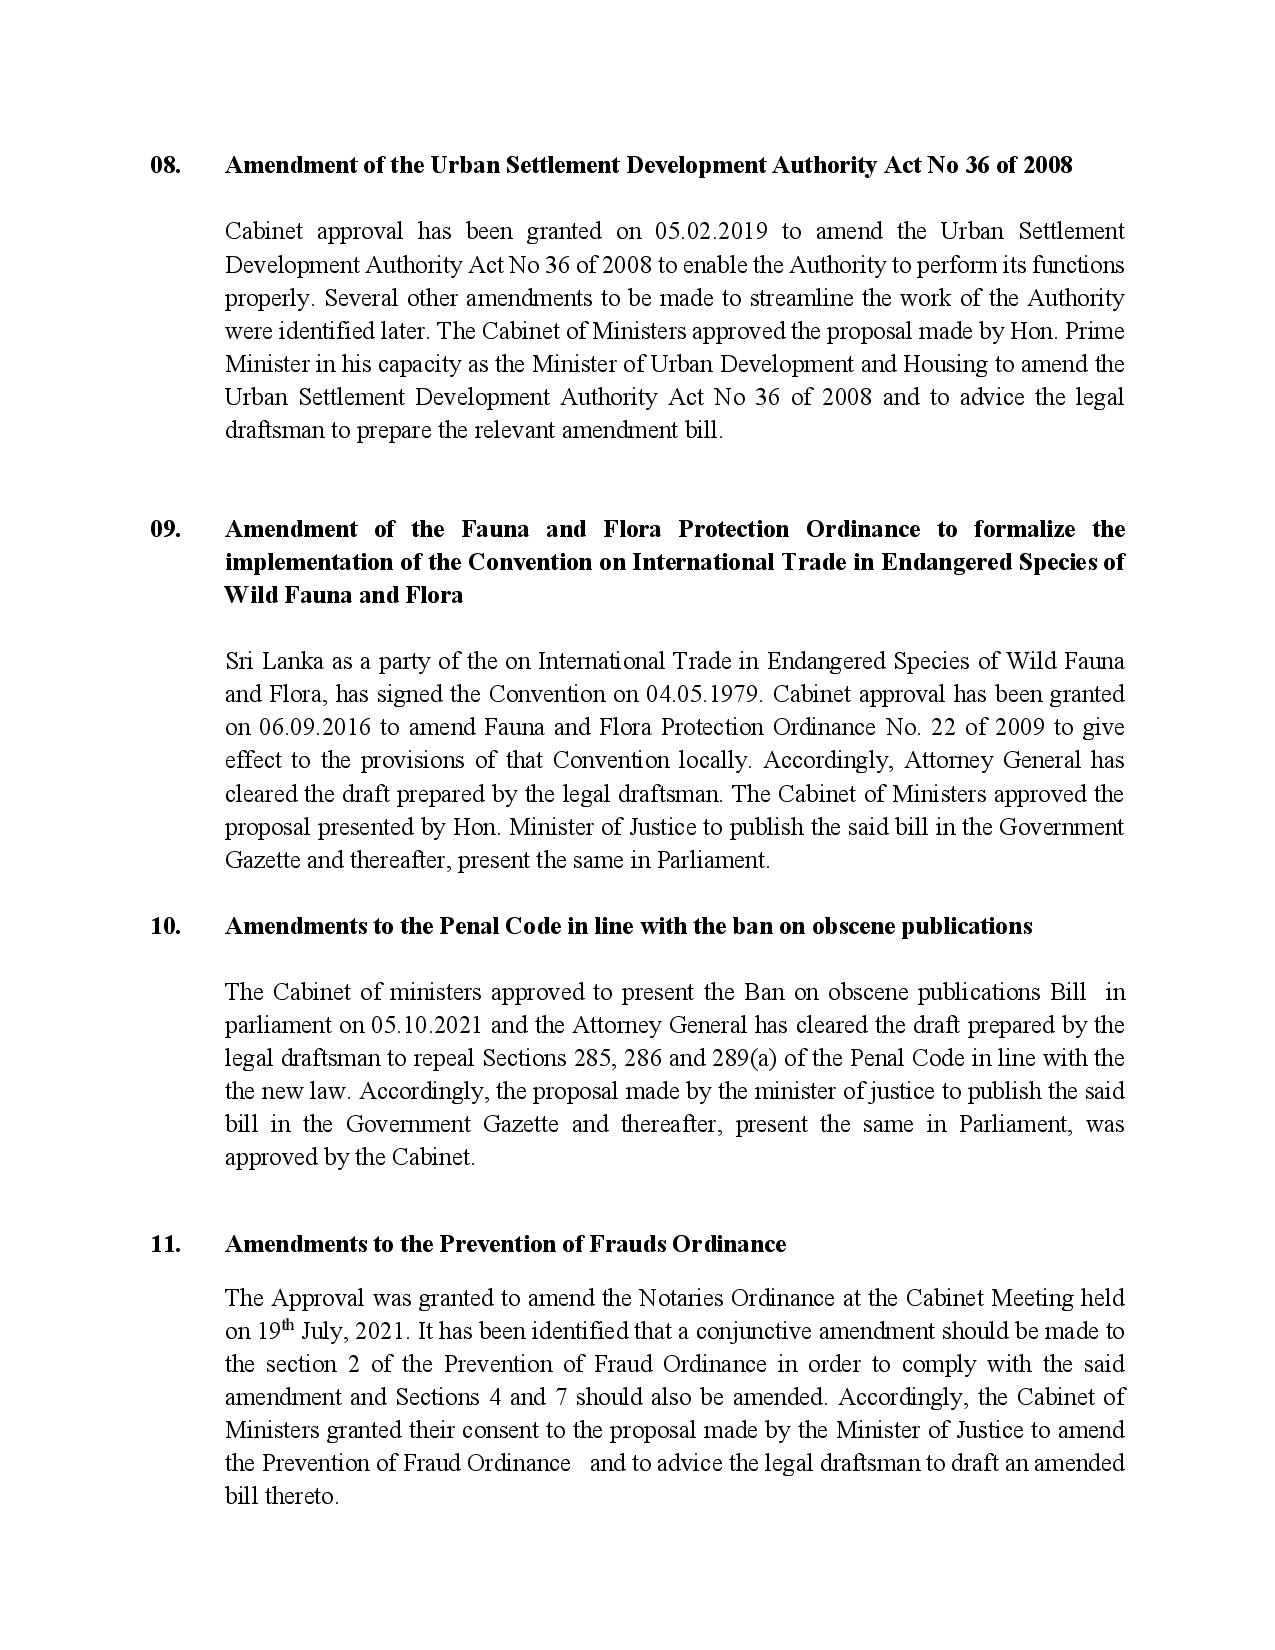 Cabinet Decision on 18.10.2021 English page 004